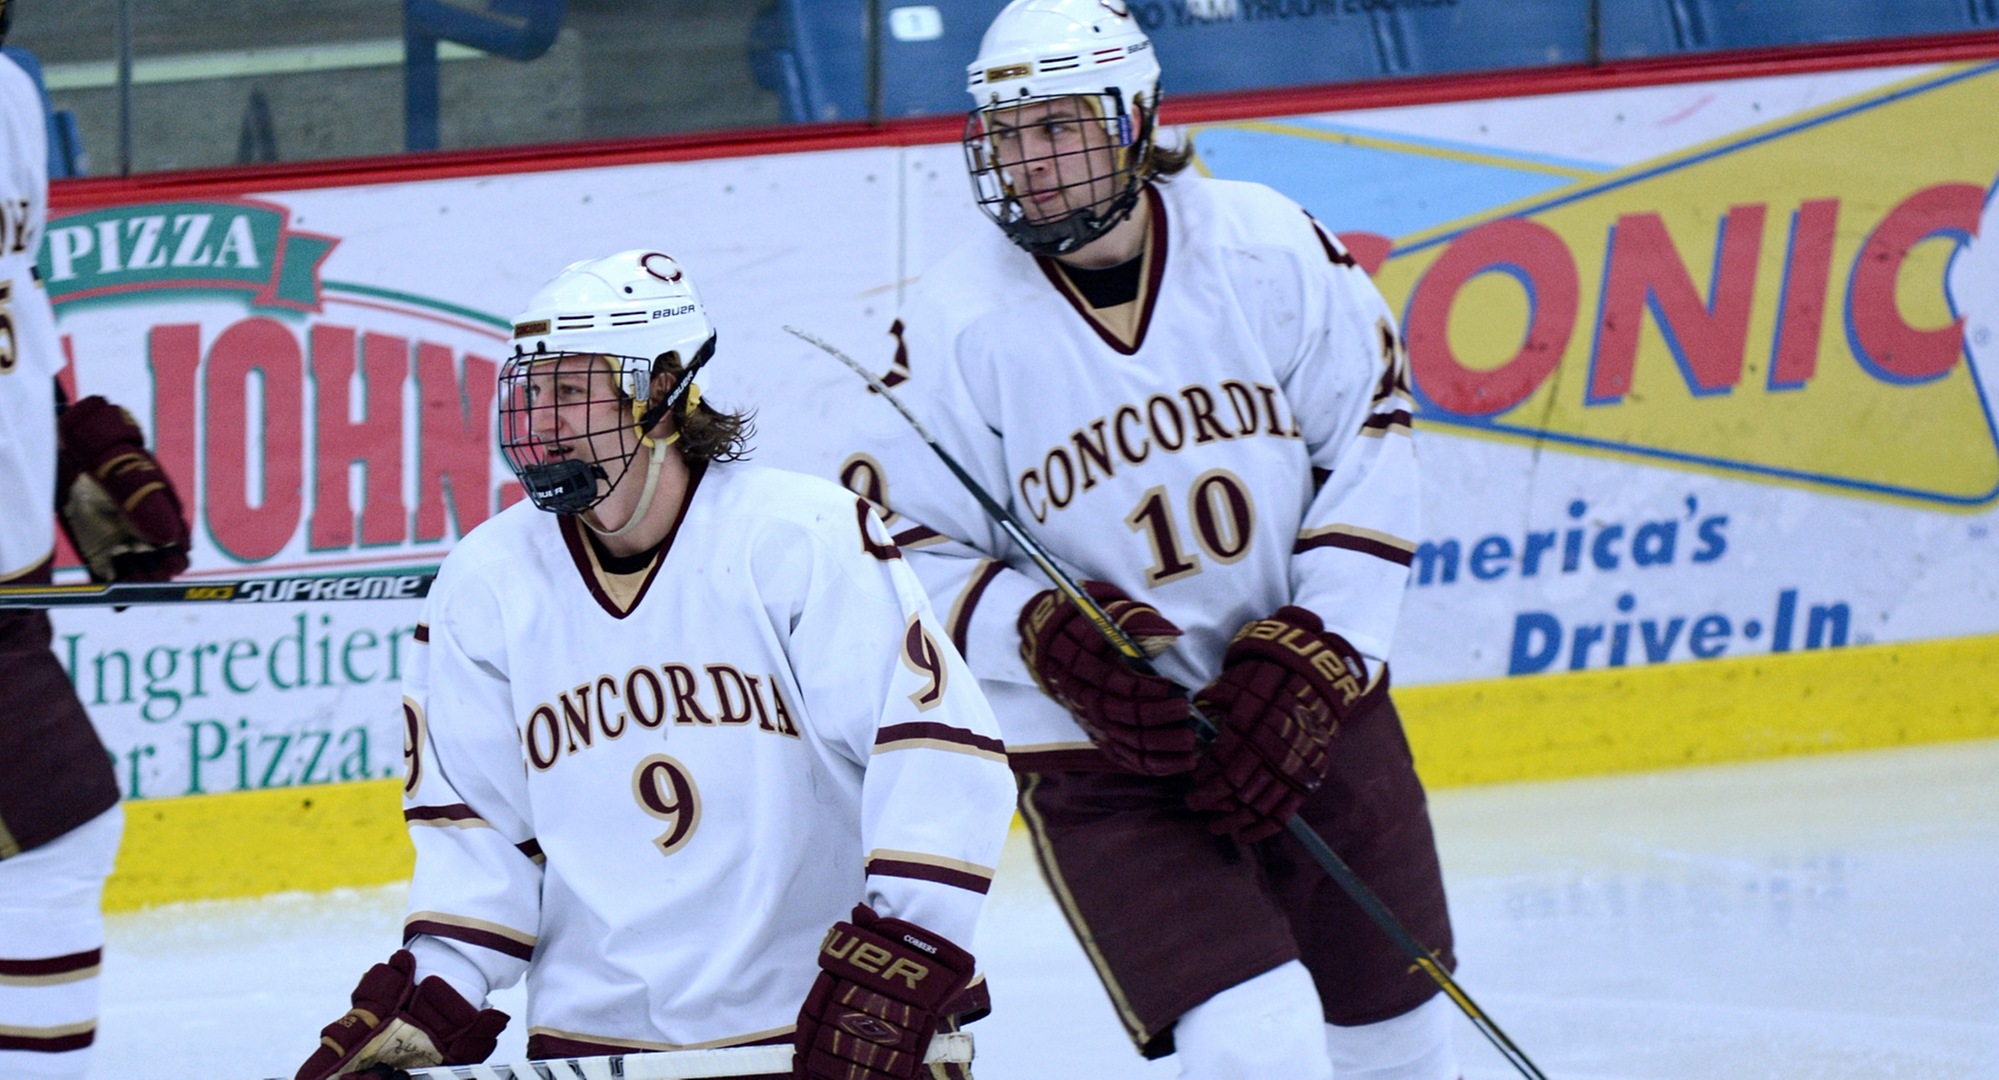 Jon Grebosky (#9) and Zach Doerring combined for three goals with Doerring getting the overtime game winner in the Cobbers' 5-4 win at St. Thomas.